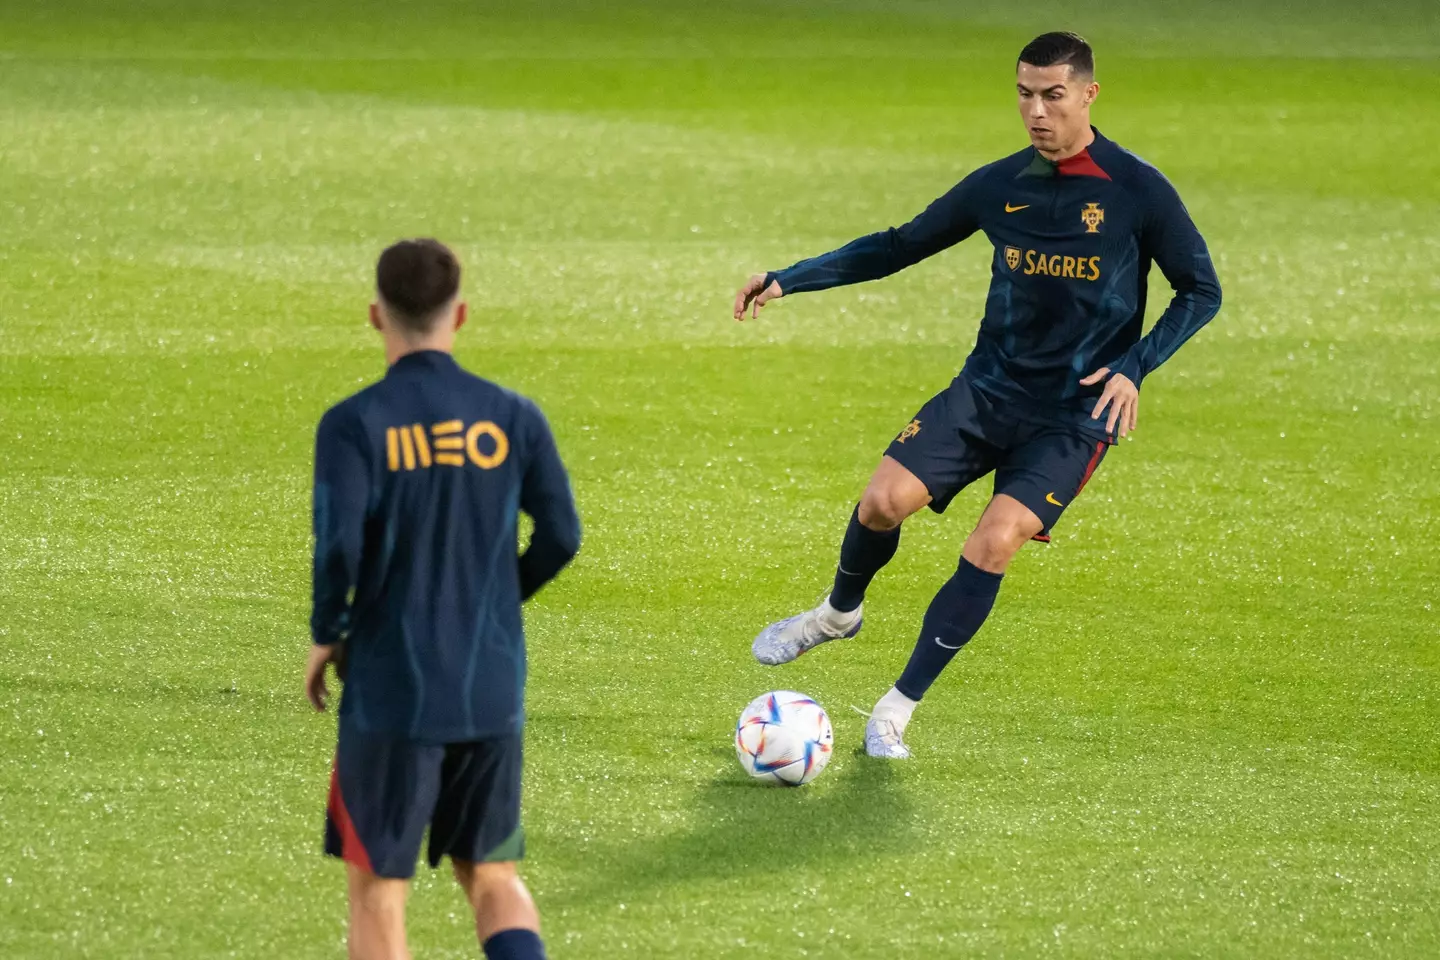 Ronaldo is now in training camp with Portugal ahead of the World Cup. Image: Alamy